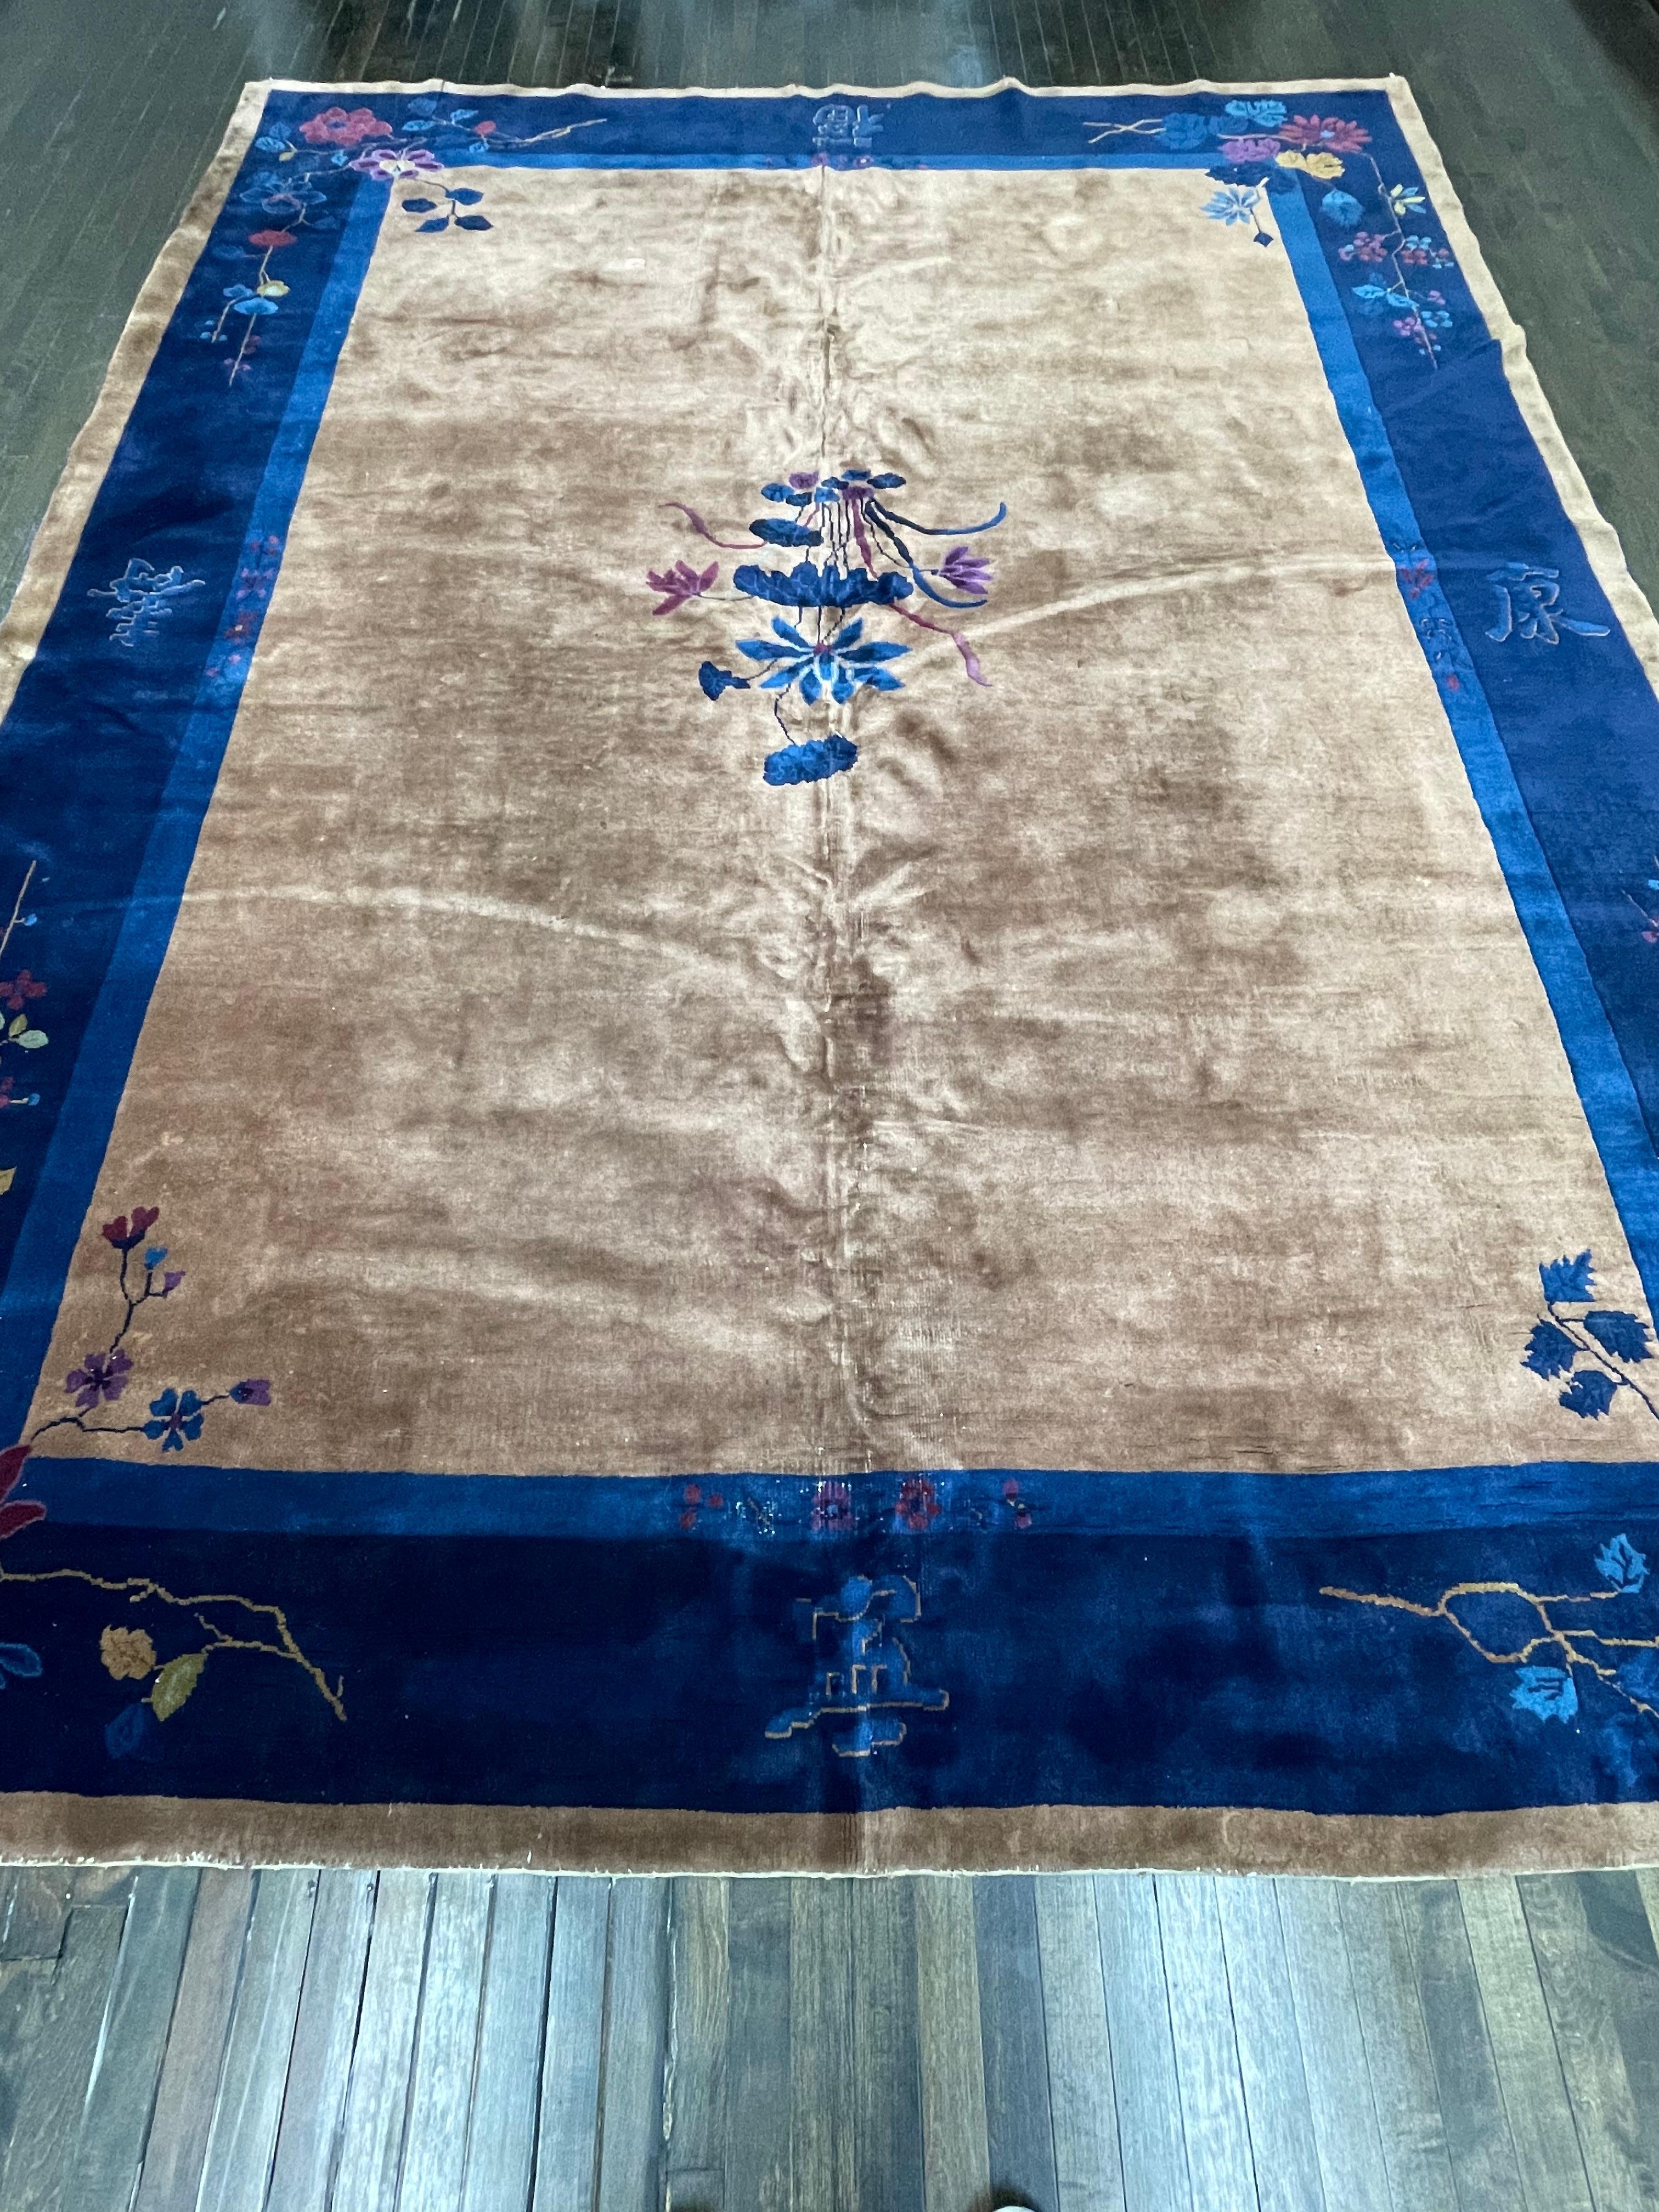 This carpet is hand knotted in China. Known as mainland Chinese these carpets were made with high quality wool and all organic dyes, which makes them age really well and develop a nice patina.

Having a tan/brown field with indigo blue border this